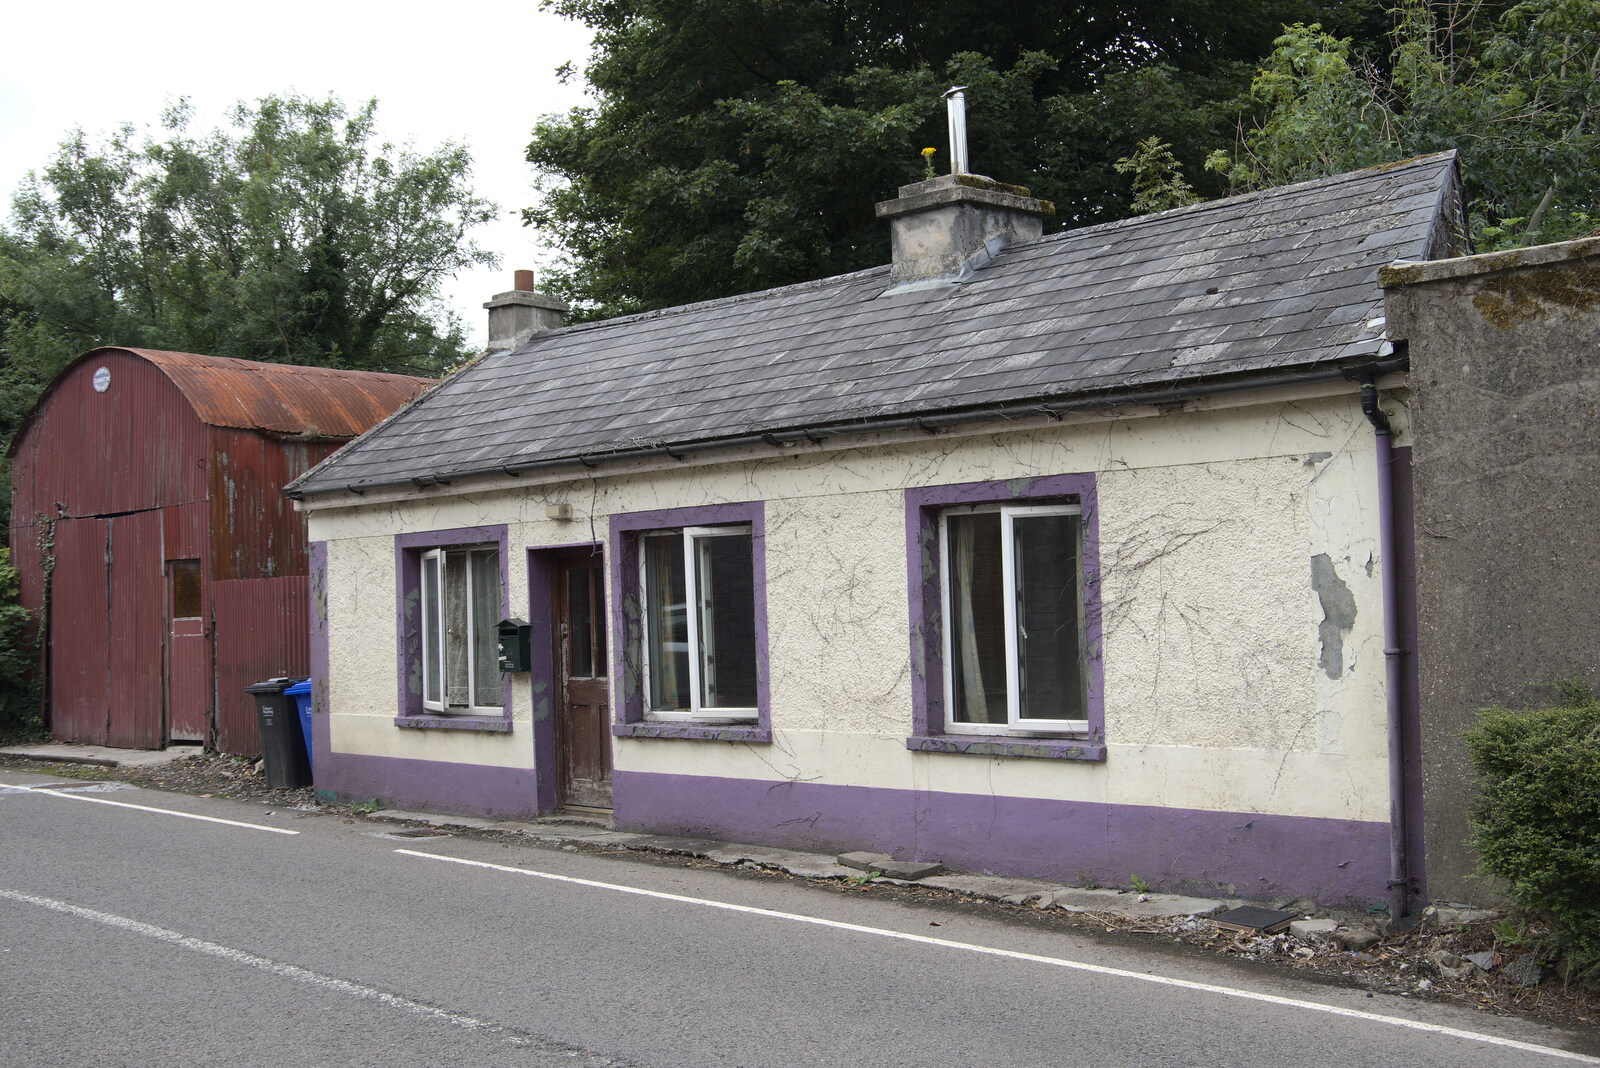 A Trip to Manorhamilton, County Leitrim, Ireland - 11th August 2021: A derelict cottage on Creamery Road